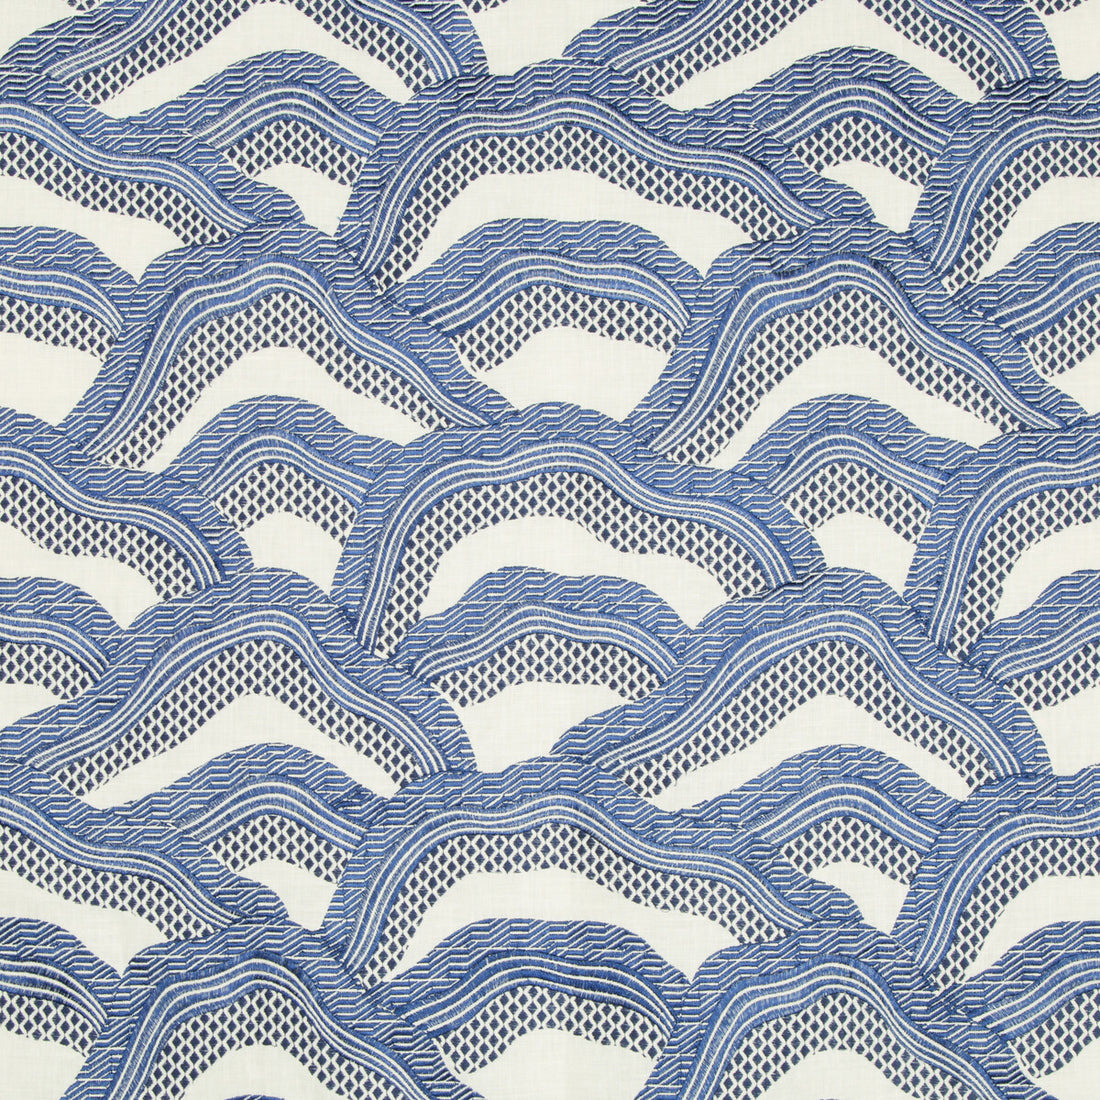 Les Rizieres Emb fabric in royal/navy color - pattern 8017127.50.0 - by Brunschwig &amp; Fils in the Les Ensembliers collection